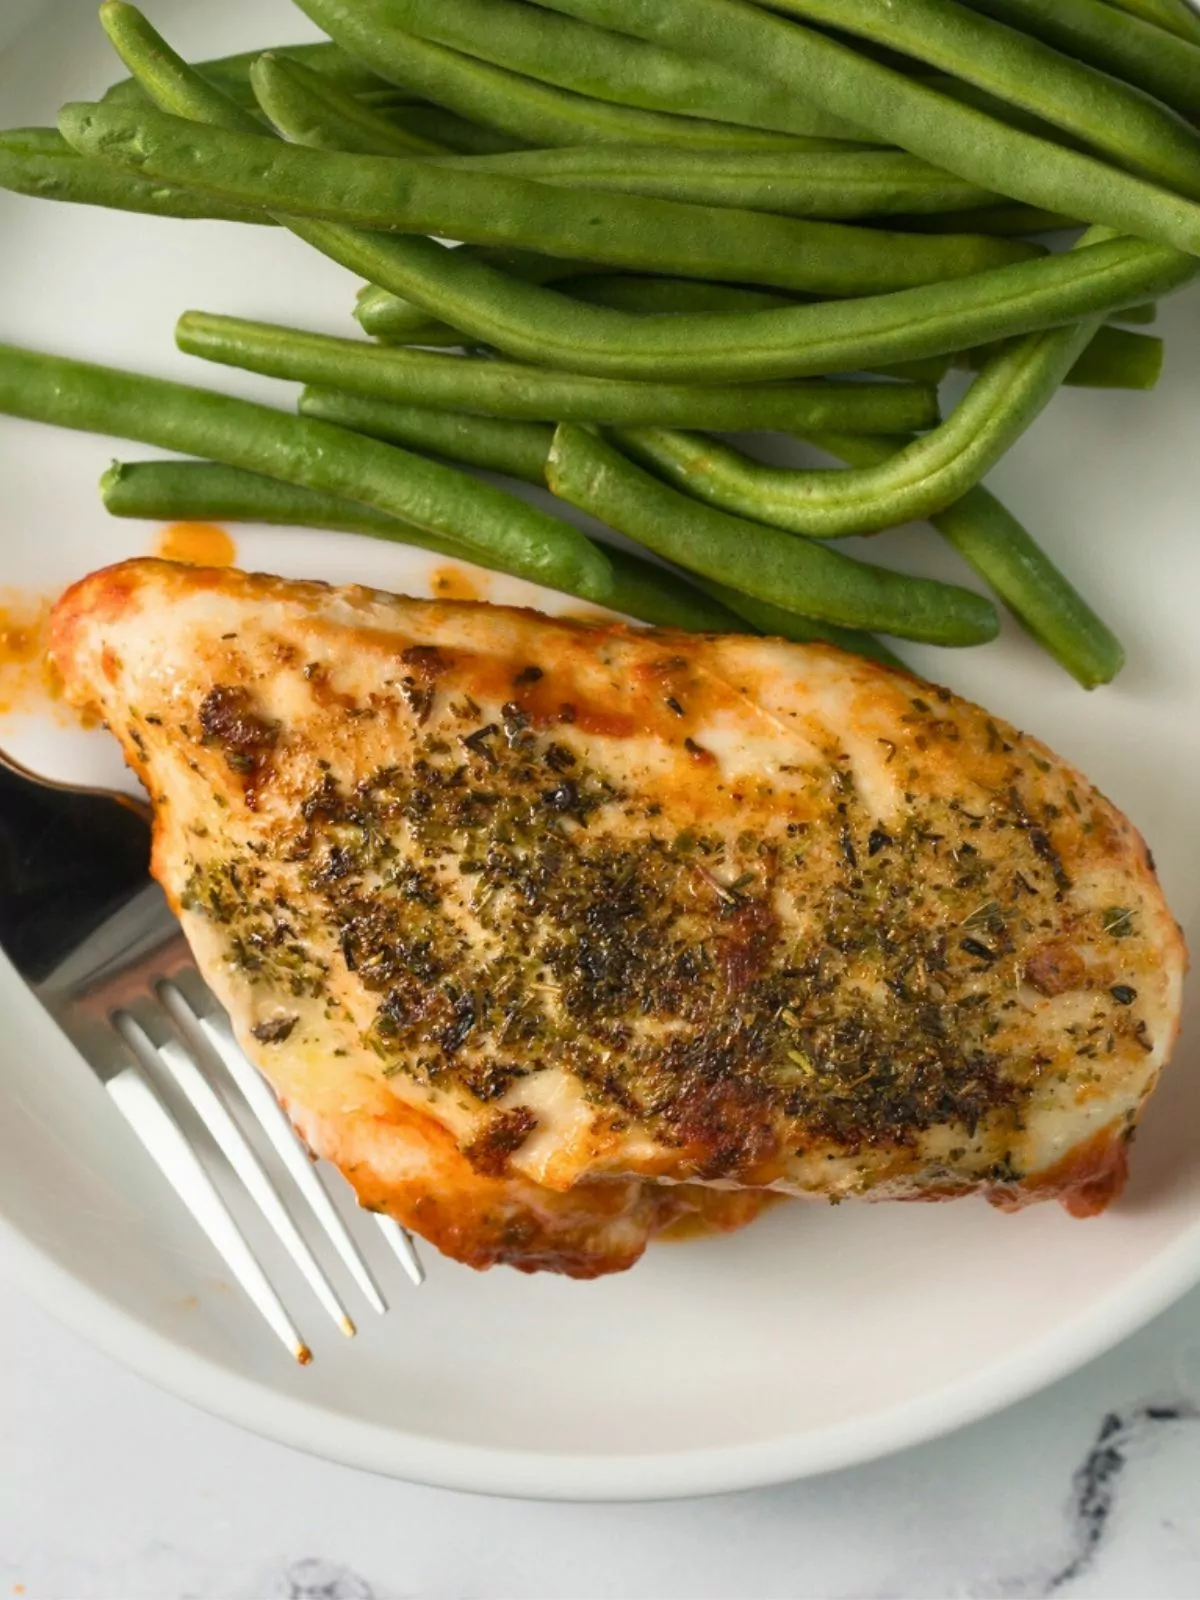 chicken breast on plate with green beans.